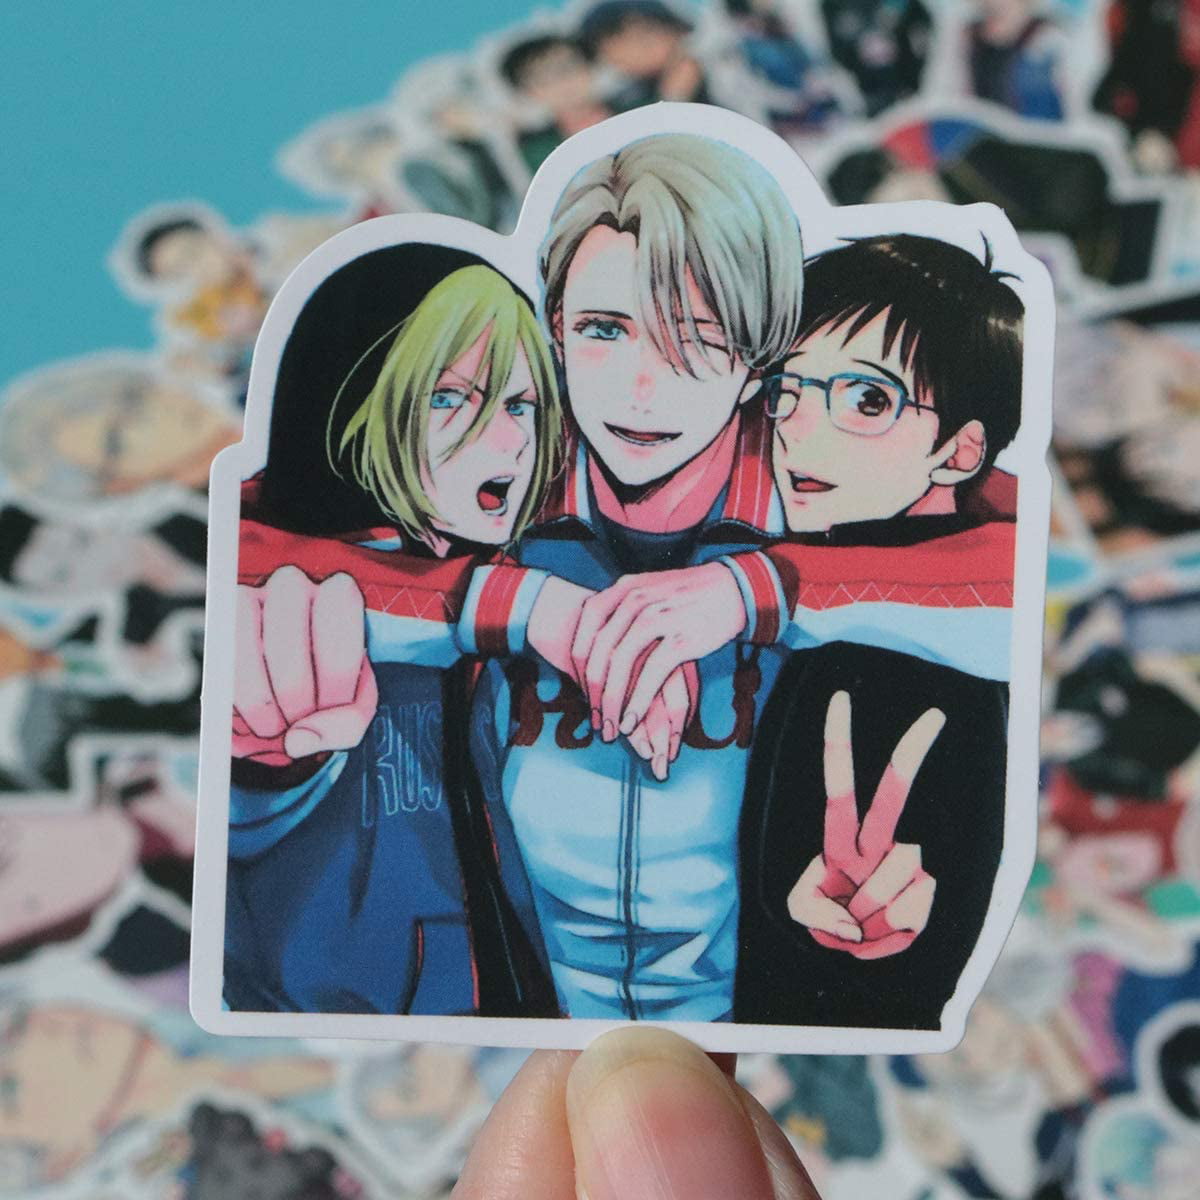 Yuri!!! on ICE Sticker Pack of 50 Stickers - Waterproof Durable Stickers  Classic Japanese Anime Stickers for Laptops, Computers, Water Bottles  (Yuri!!! on ICE) 